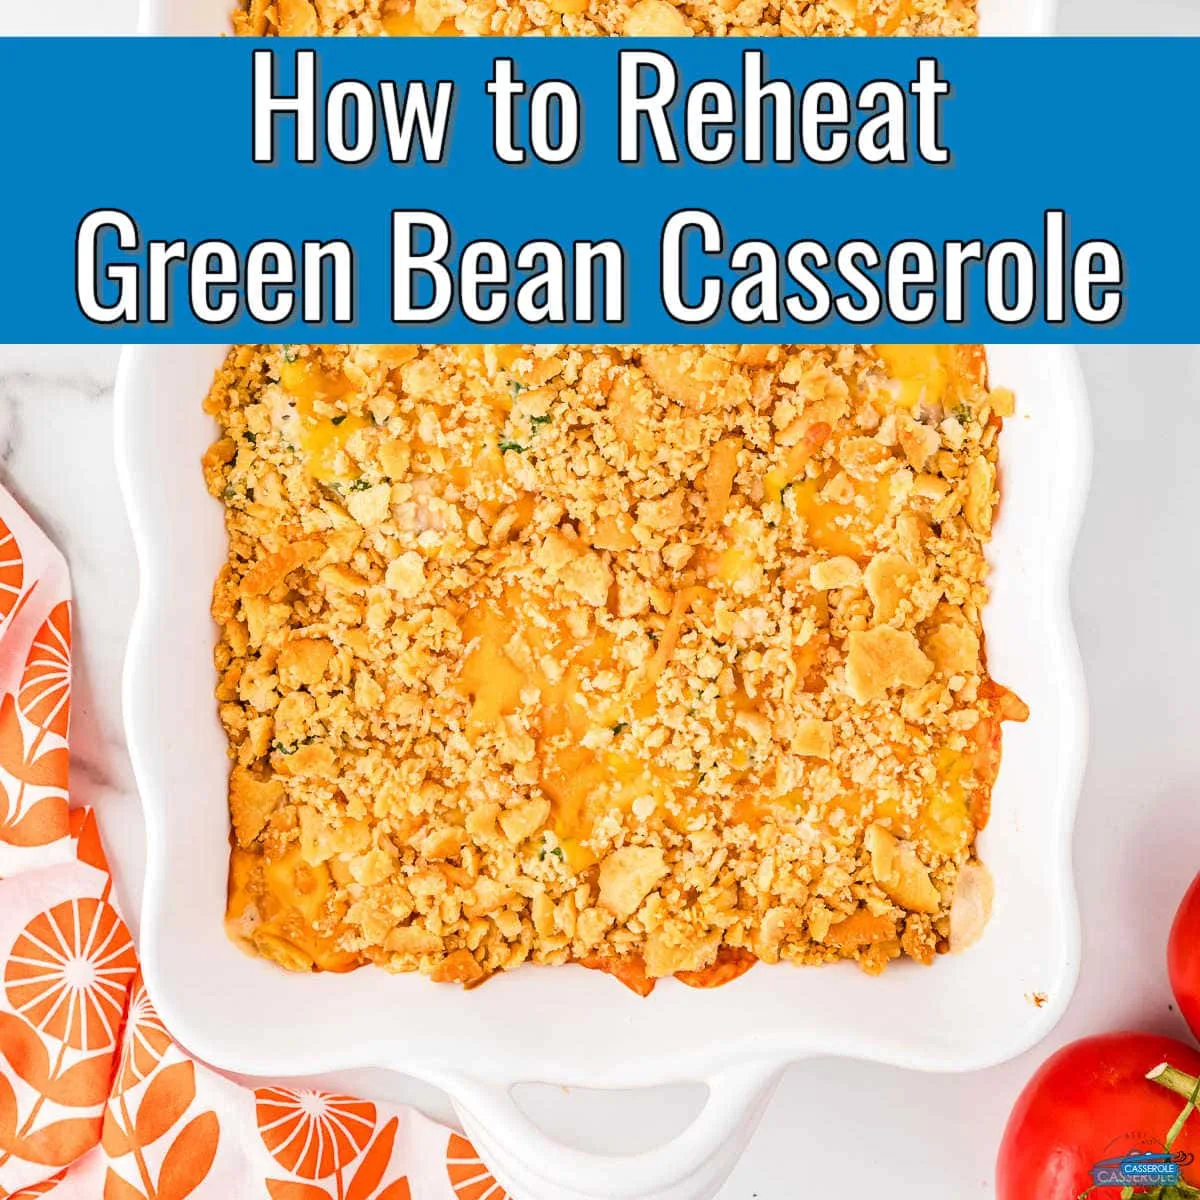 half a casserole dish with blue banner and text "how to reheat green bean casserole"